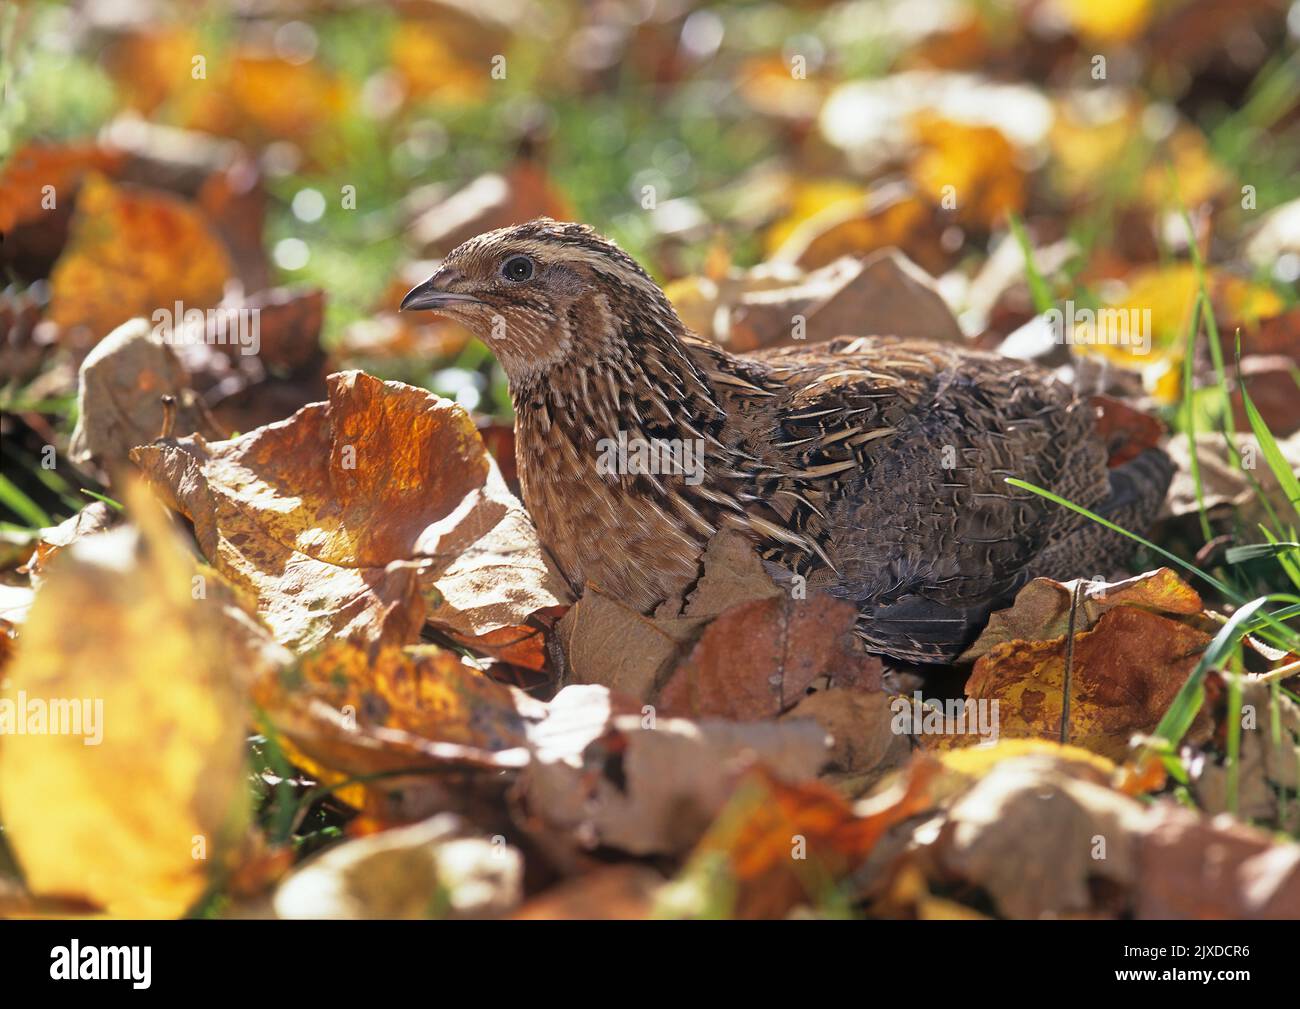 Common Quail (Coturnix coturnix) in leaf litter. Germany Stock Photo